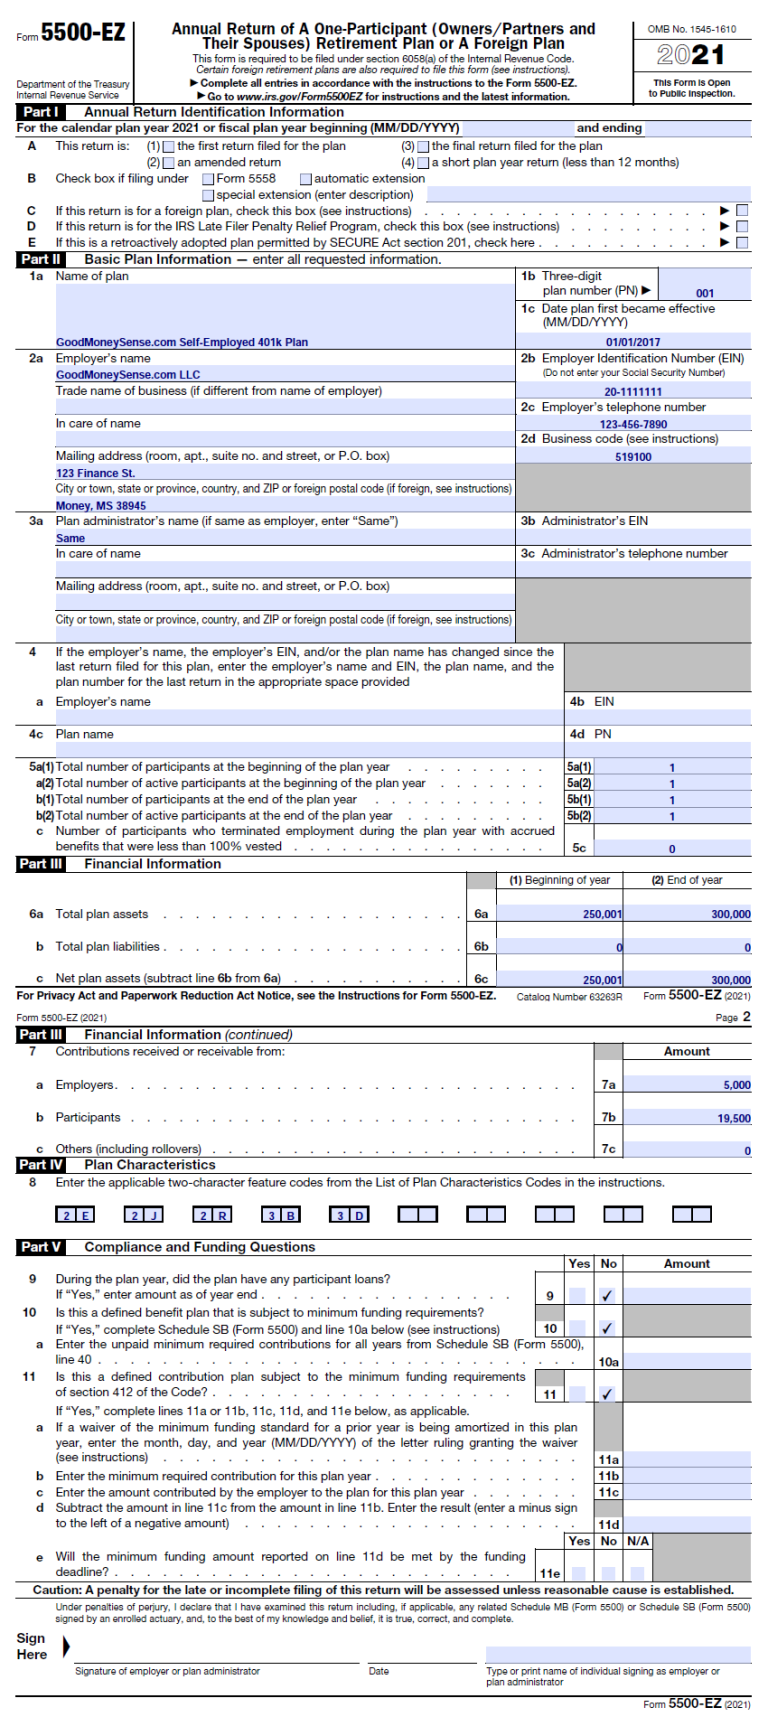 form-5500-ez-example-complete-in-a-few-easy-steps-infographic